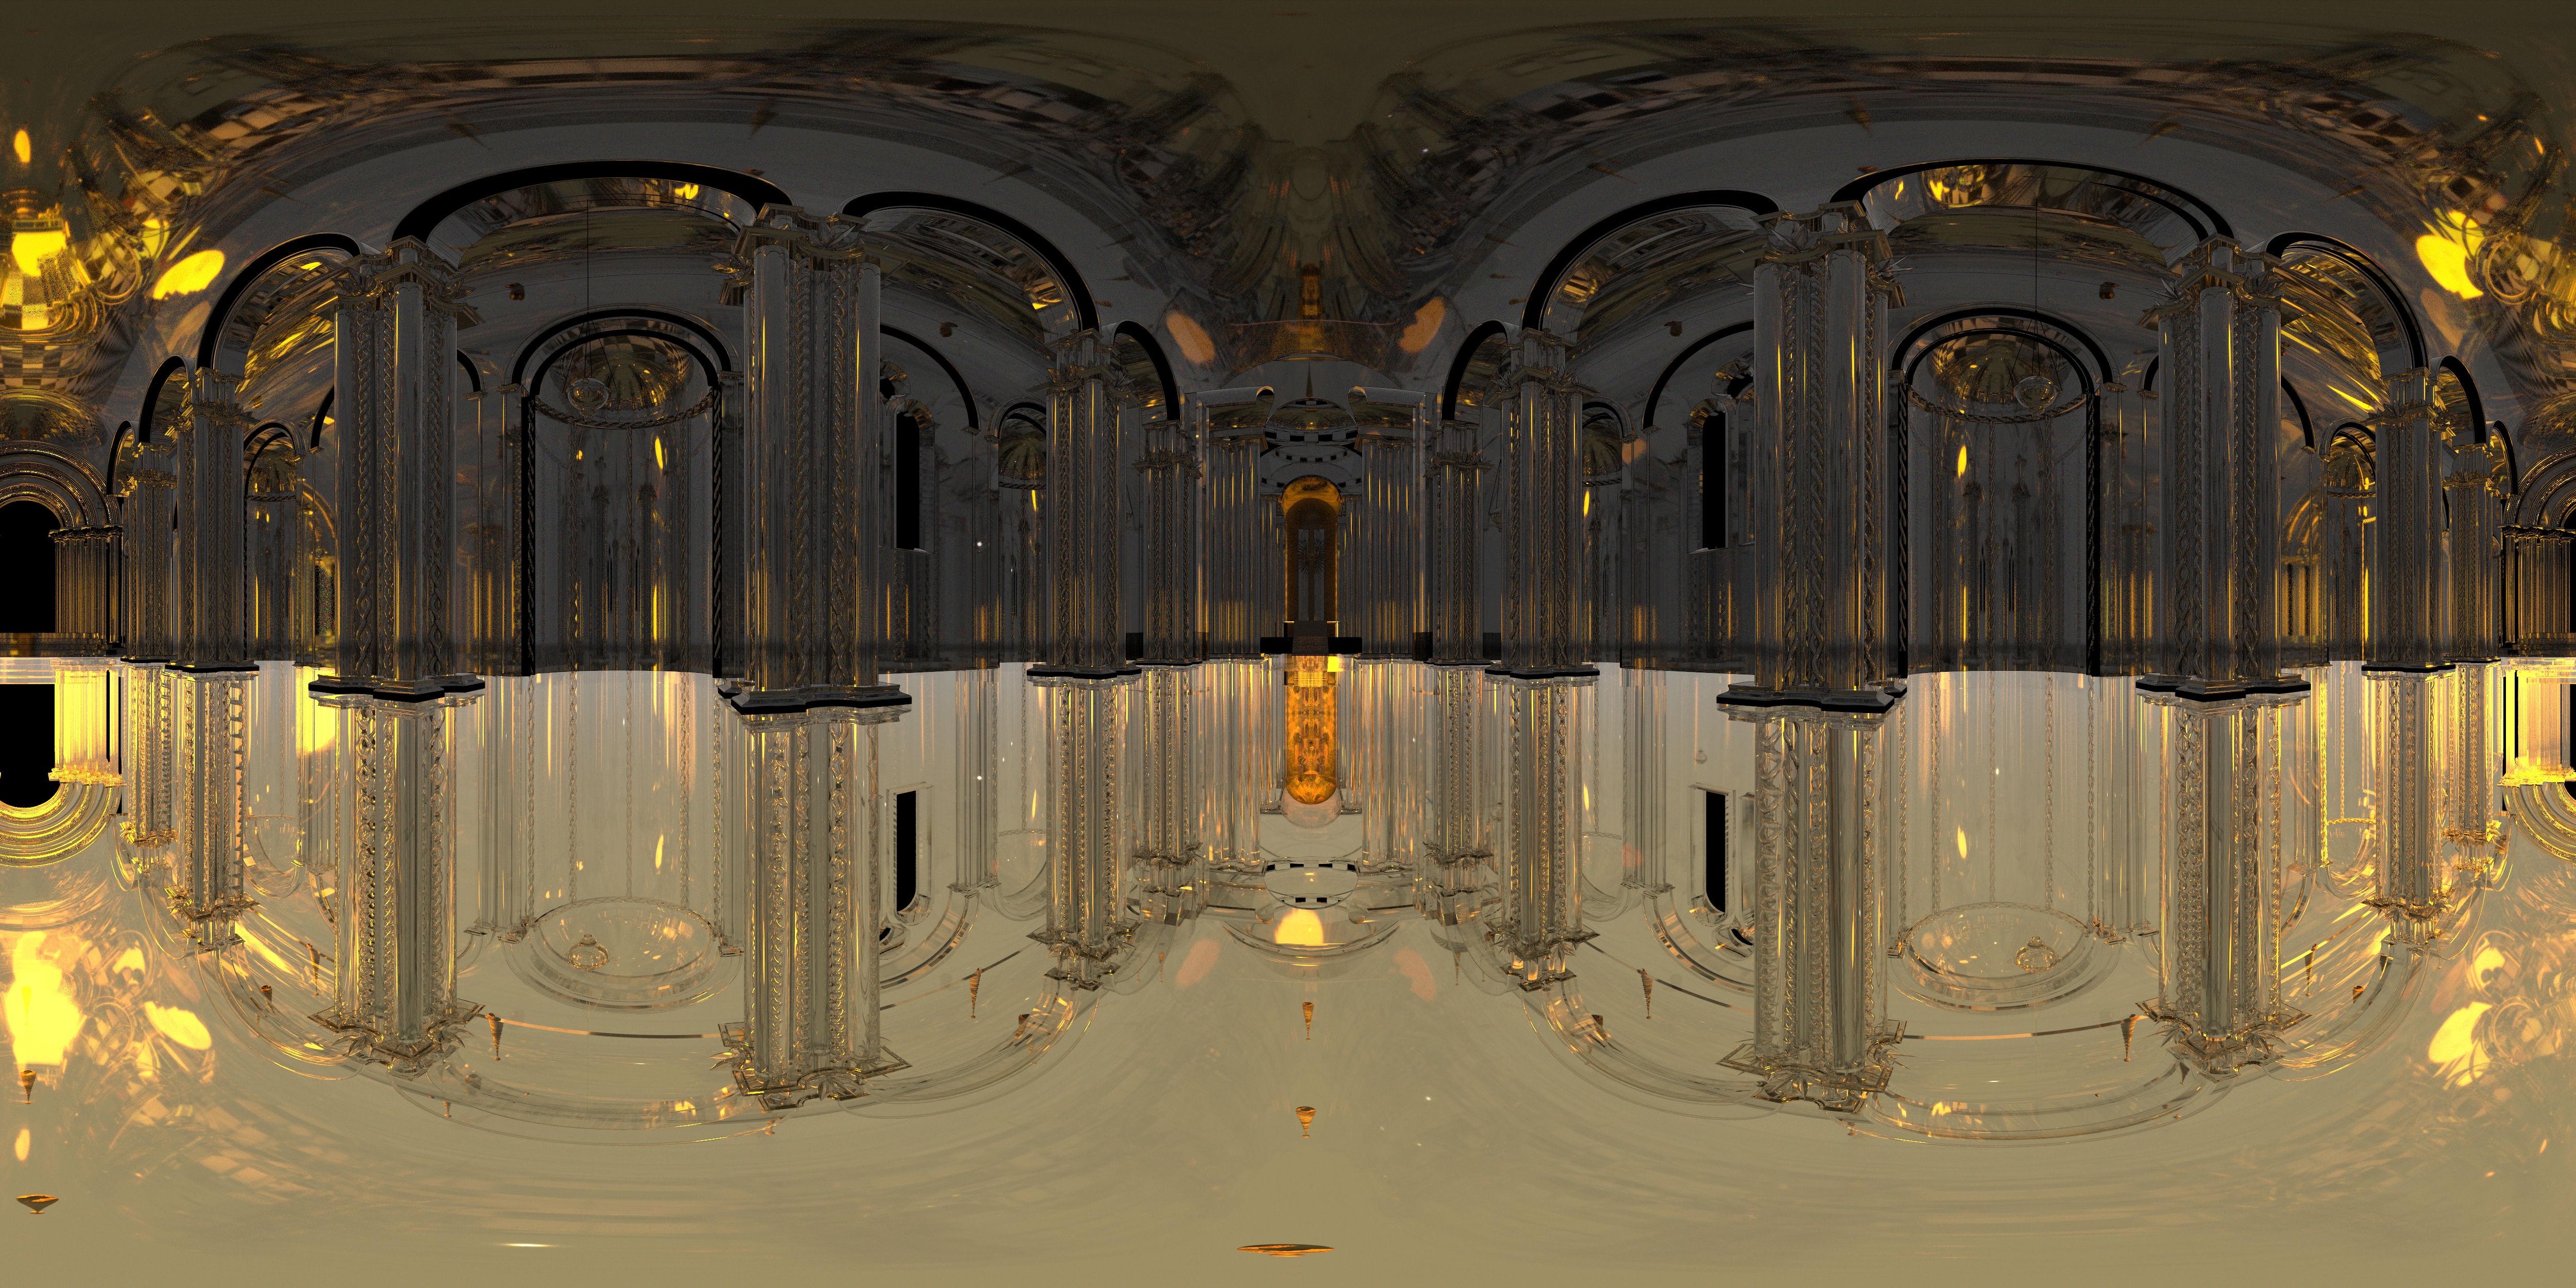 /Glass%20cathedral%20on%20chequer%20landscape%20in%20equirectangular%20immersive%20format